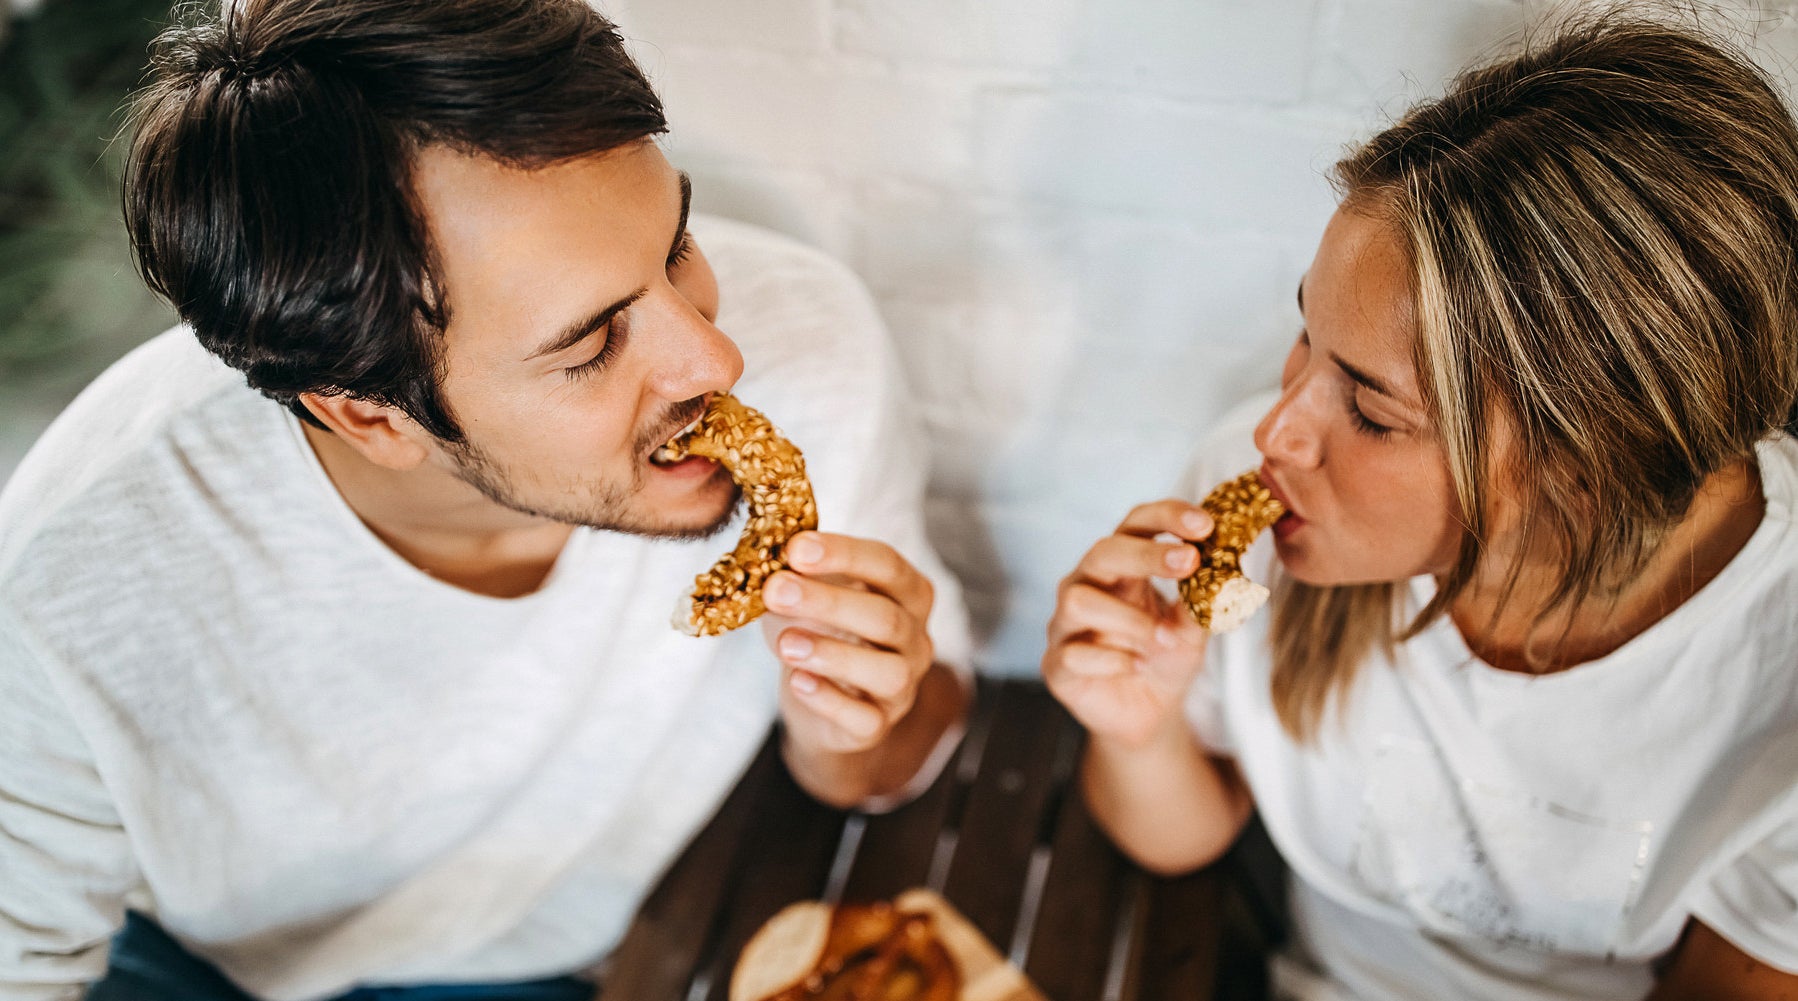 A photo of a man and a woman from above eating a  bagel.